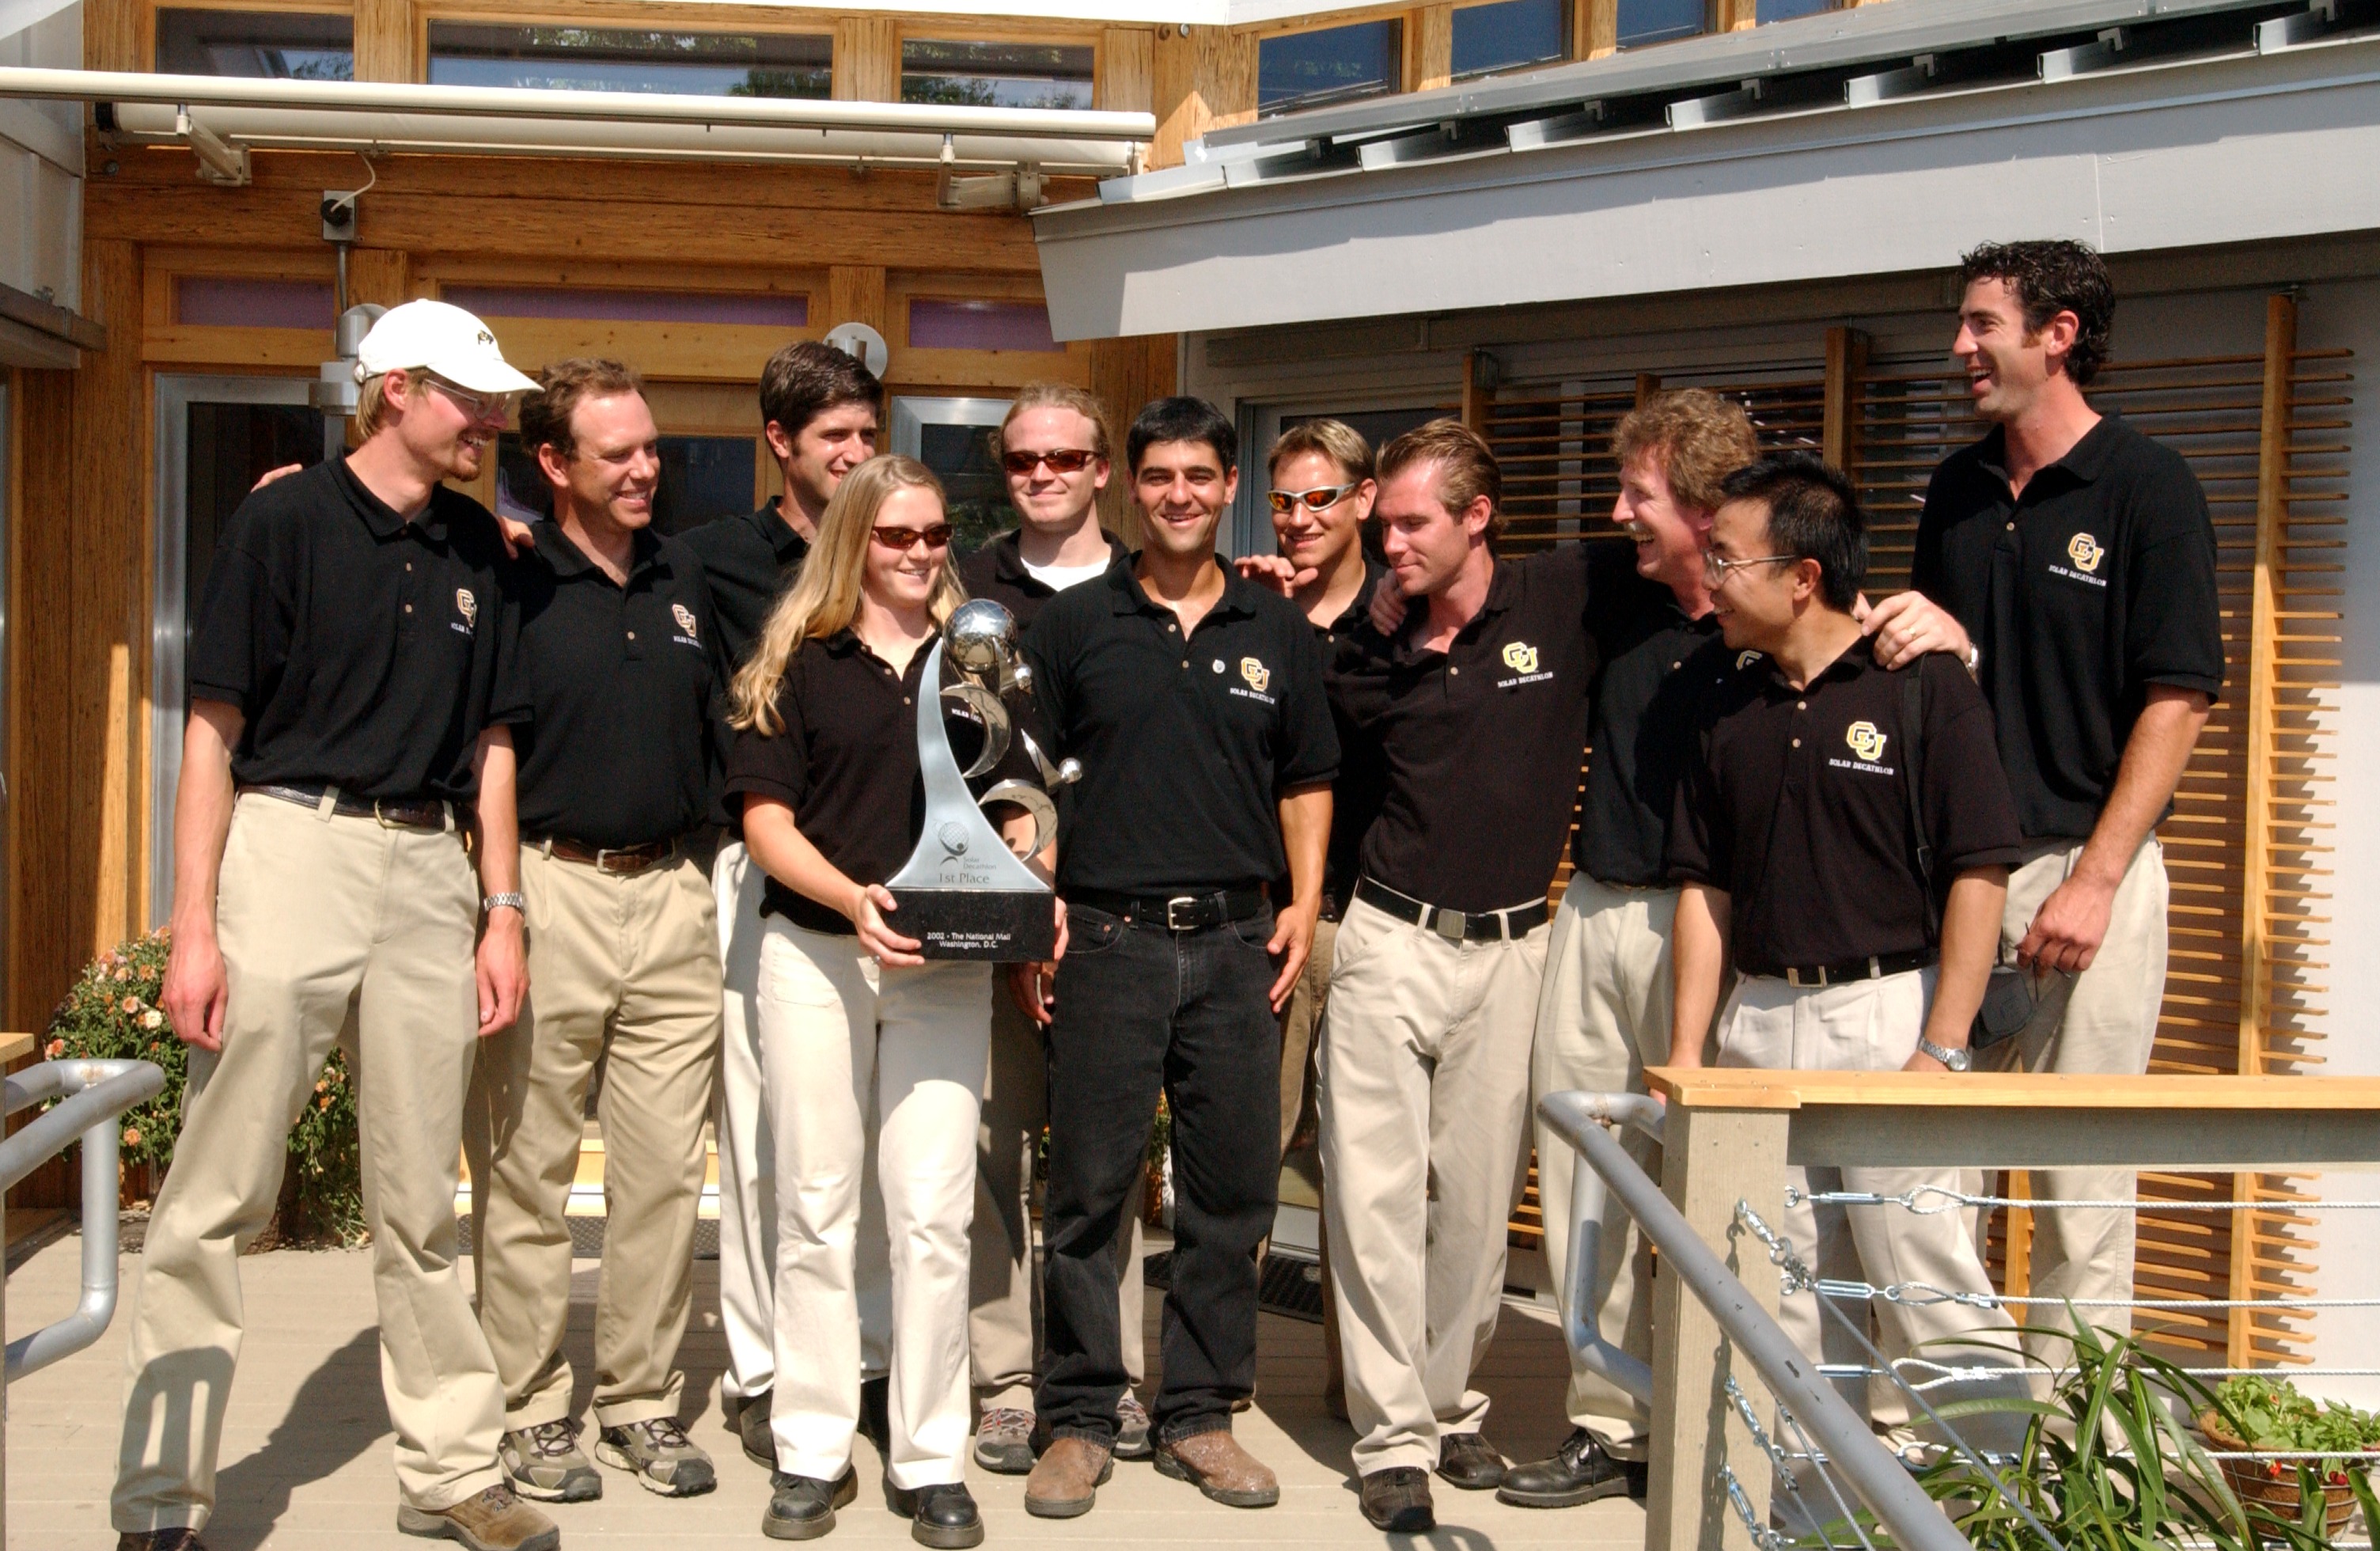 Photo of a group of men standing around a woman who is holding a large trophy.